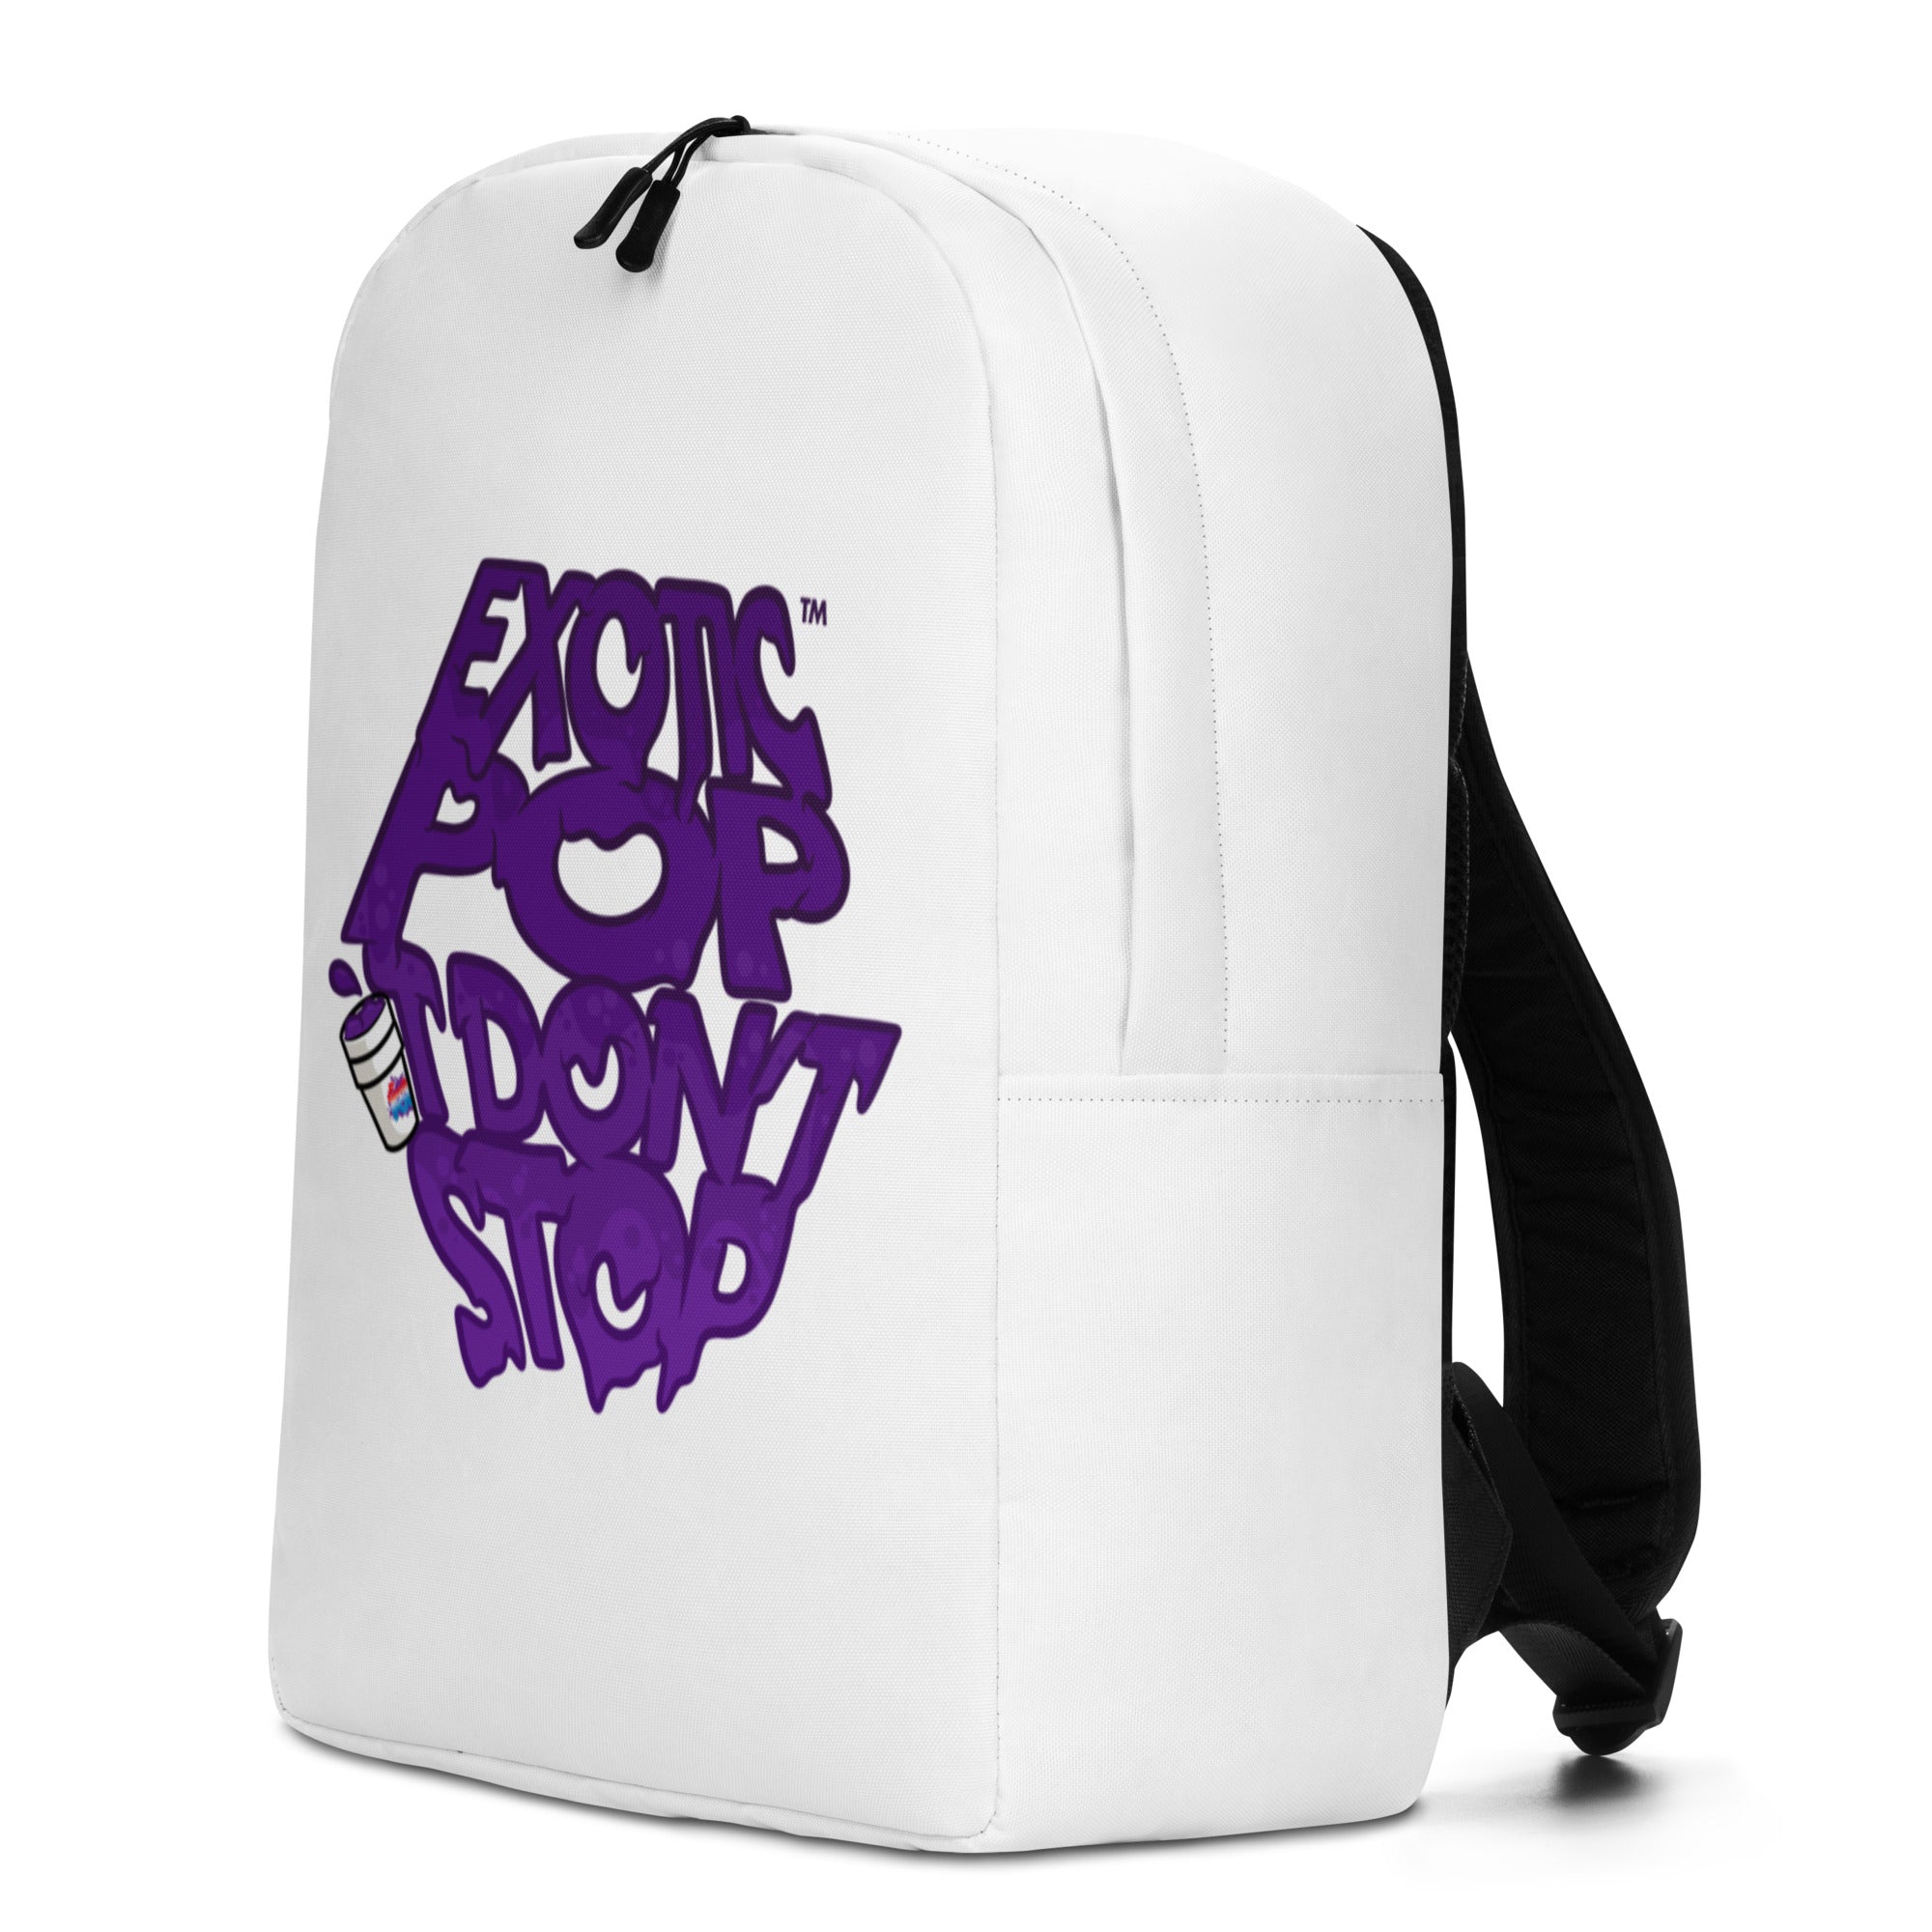 Exotic Pop It Don't Stop White backpack